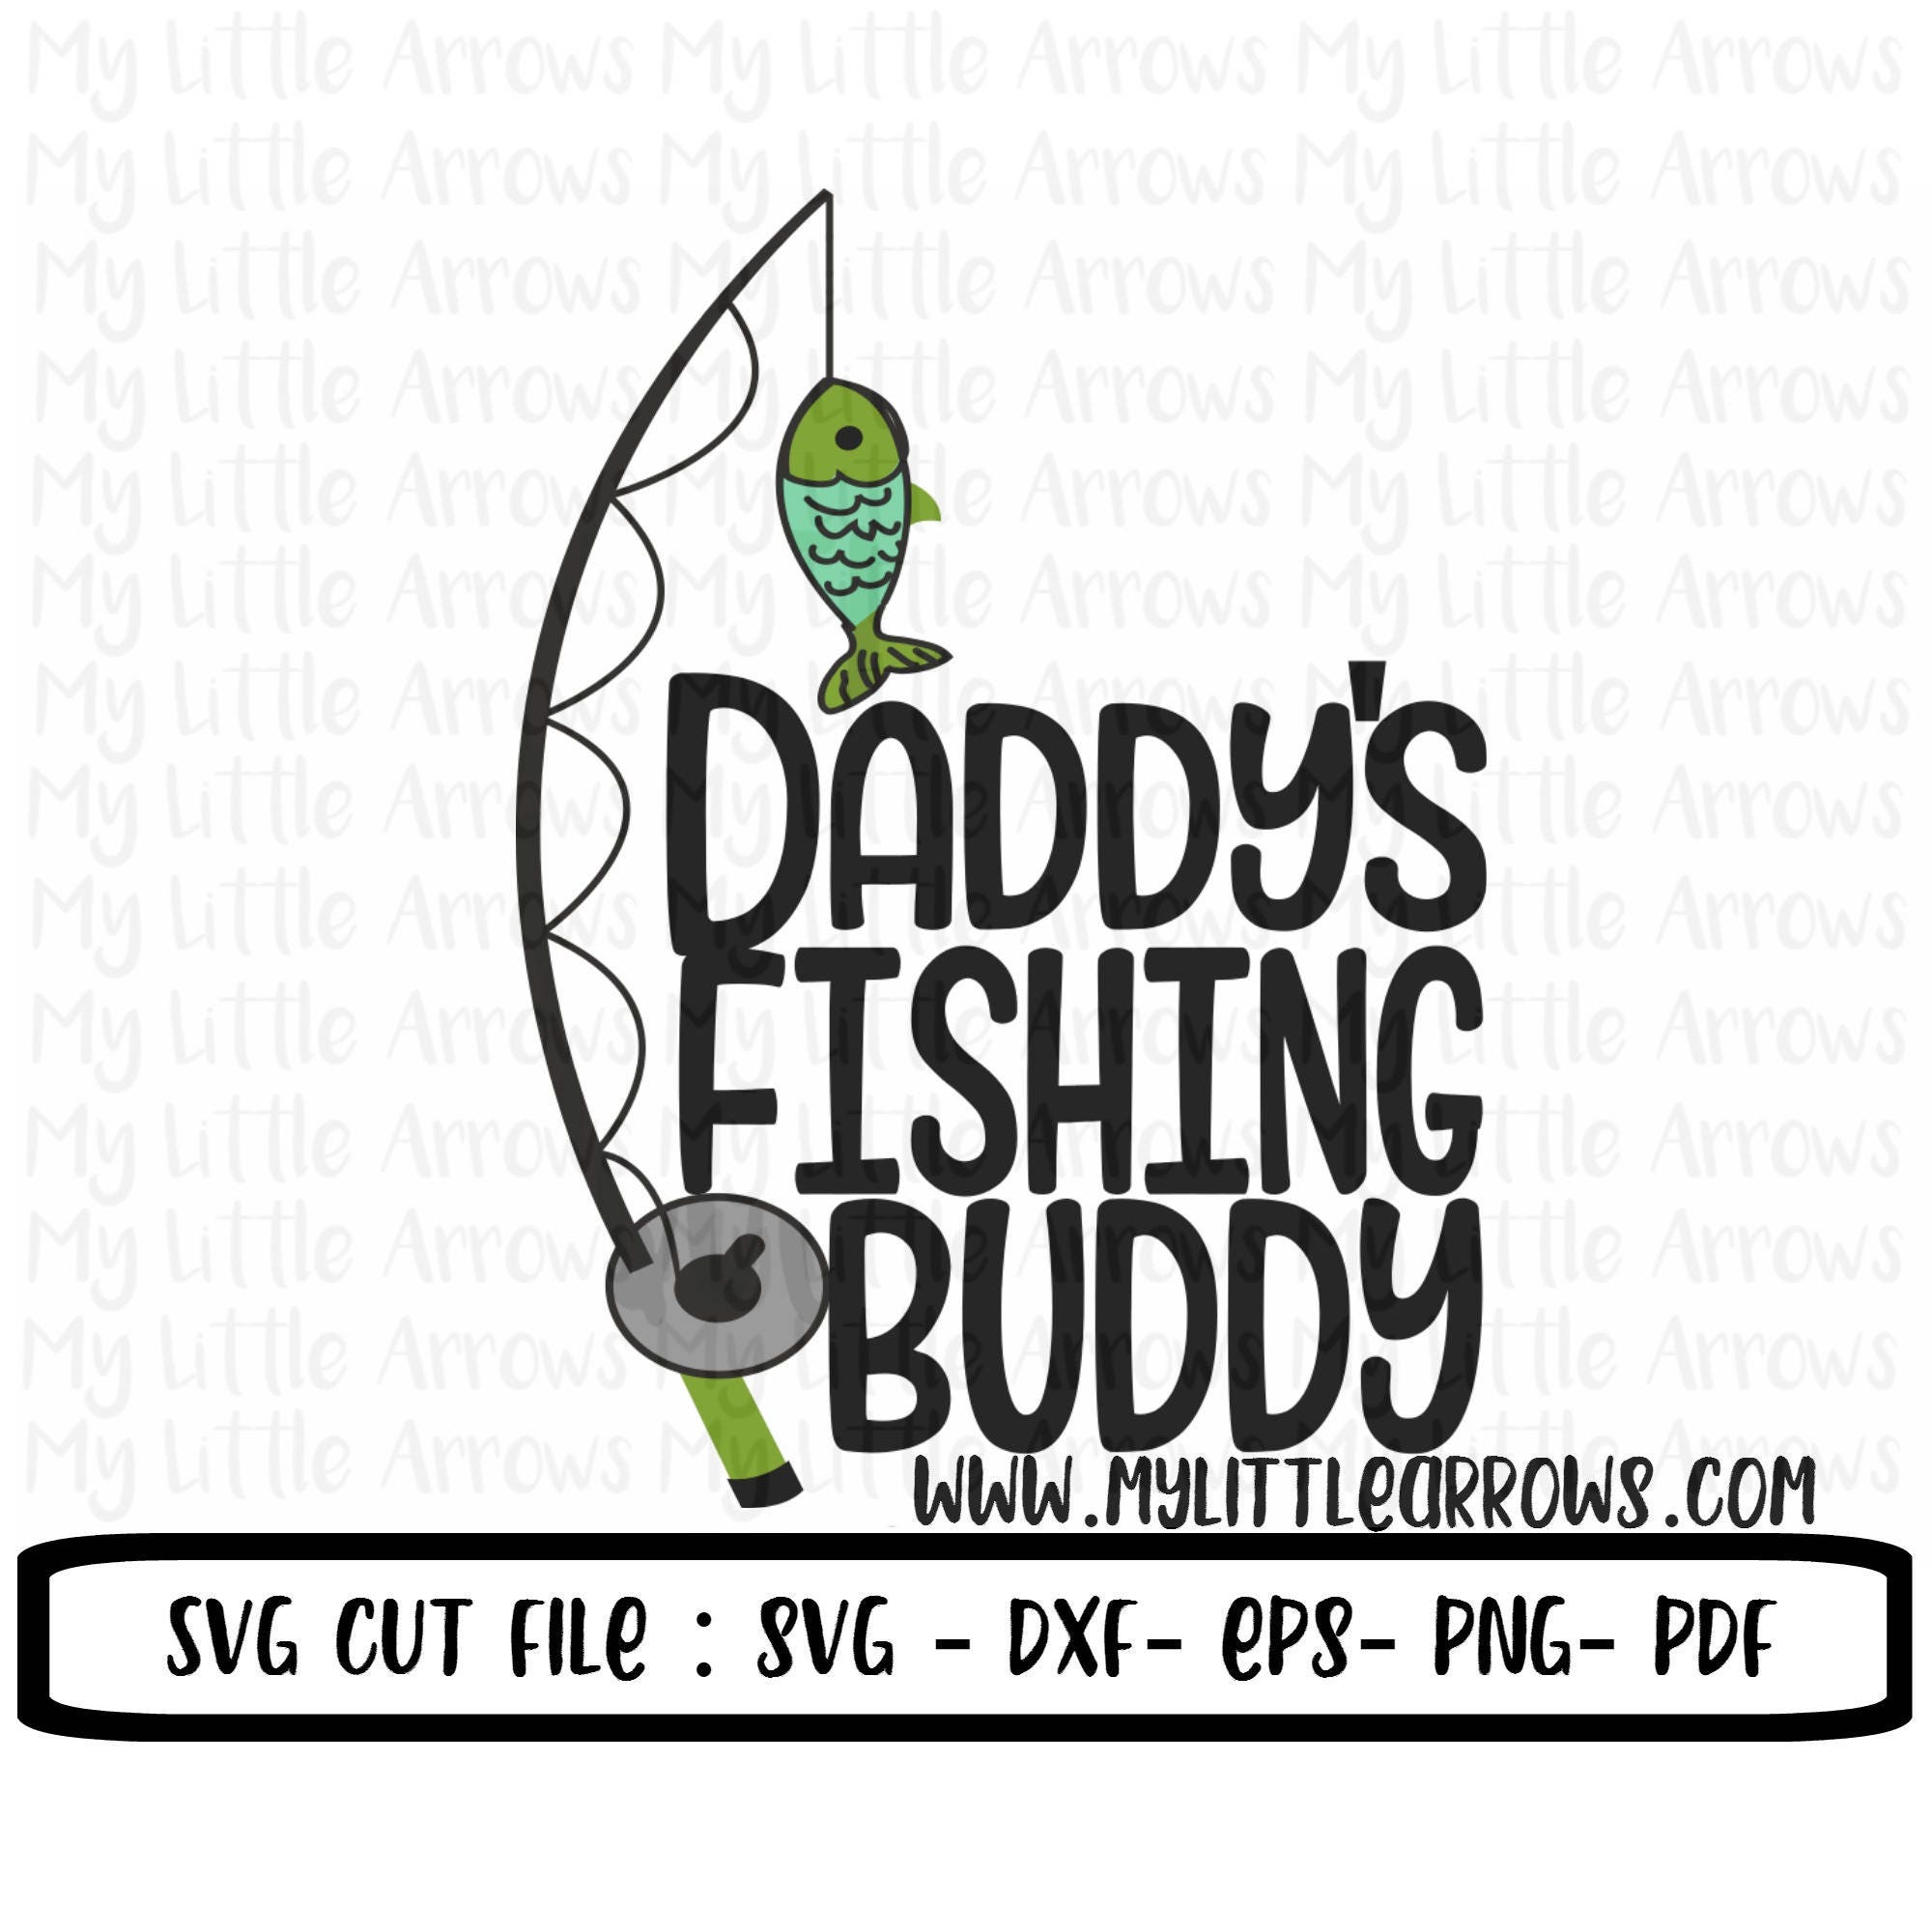 Daddy's fishing buddy SVG DXF EPS png Files for